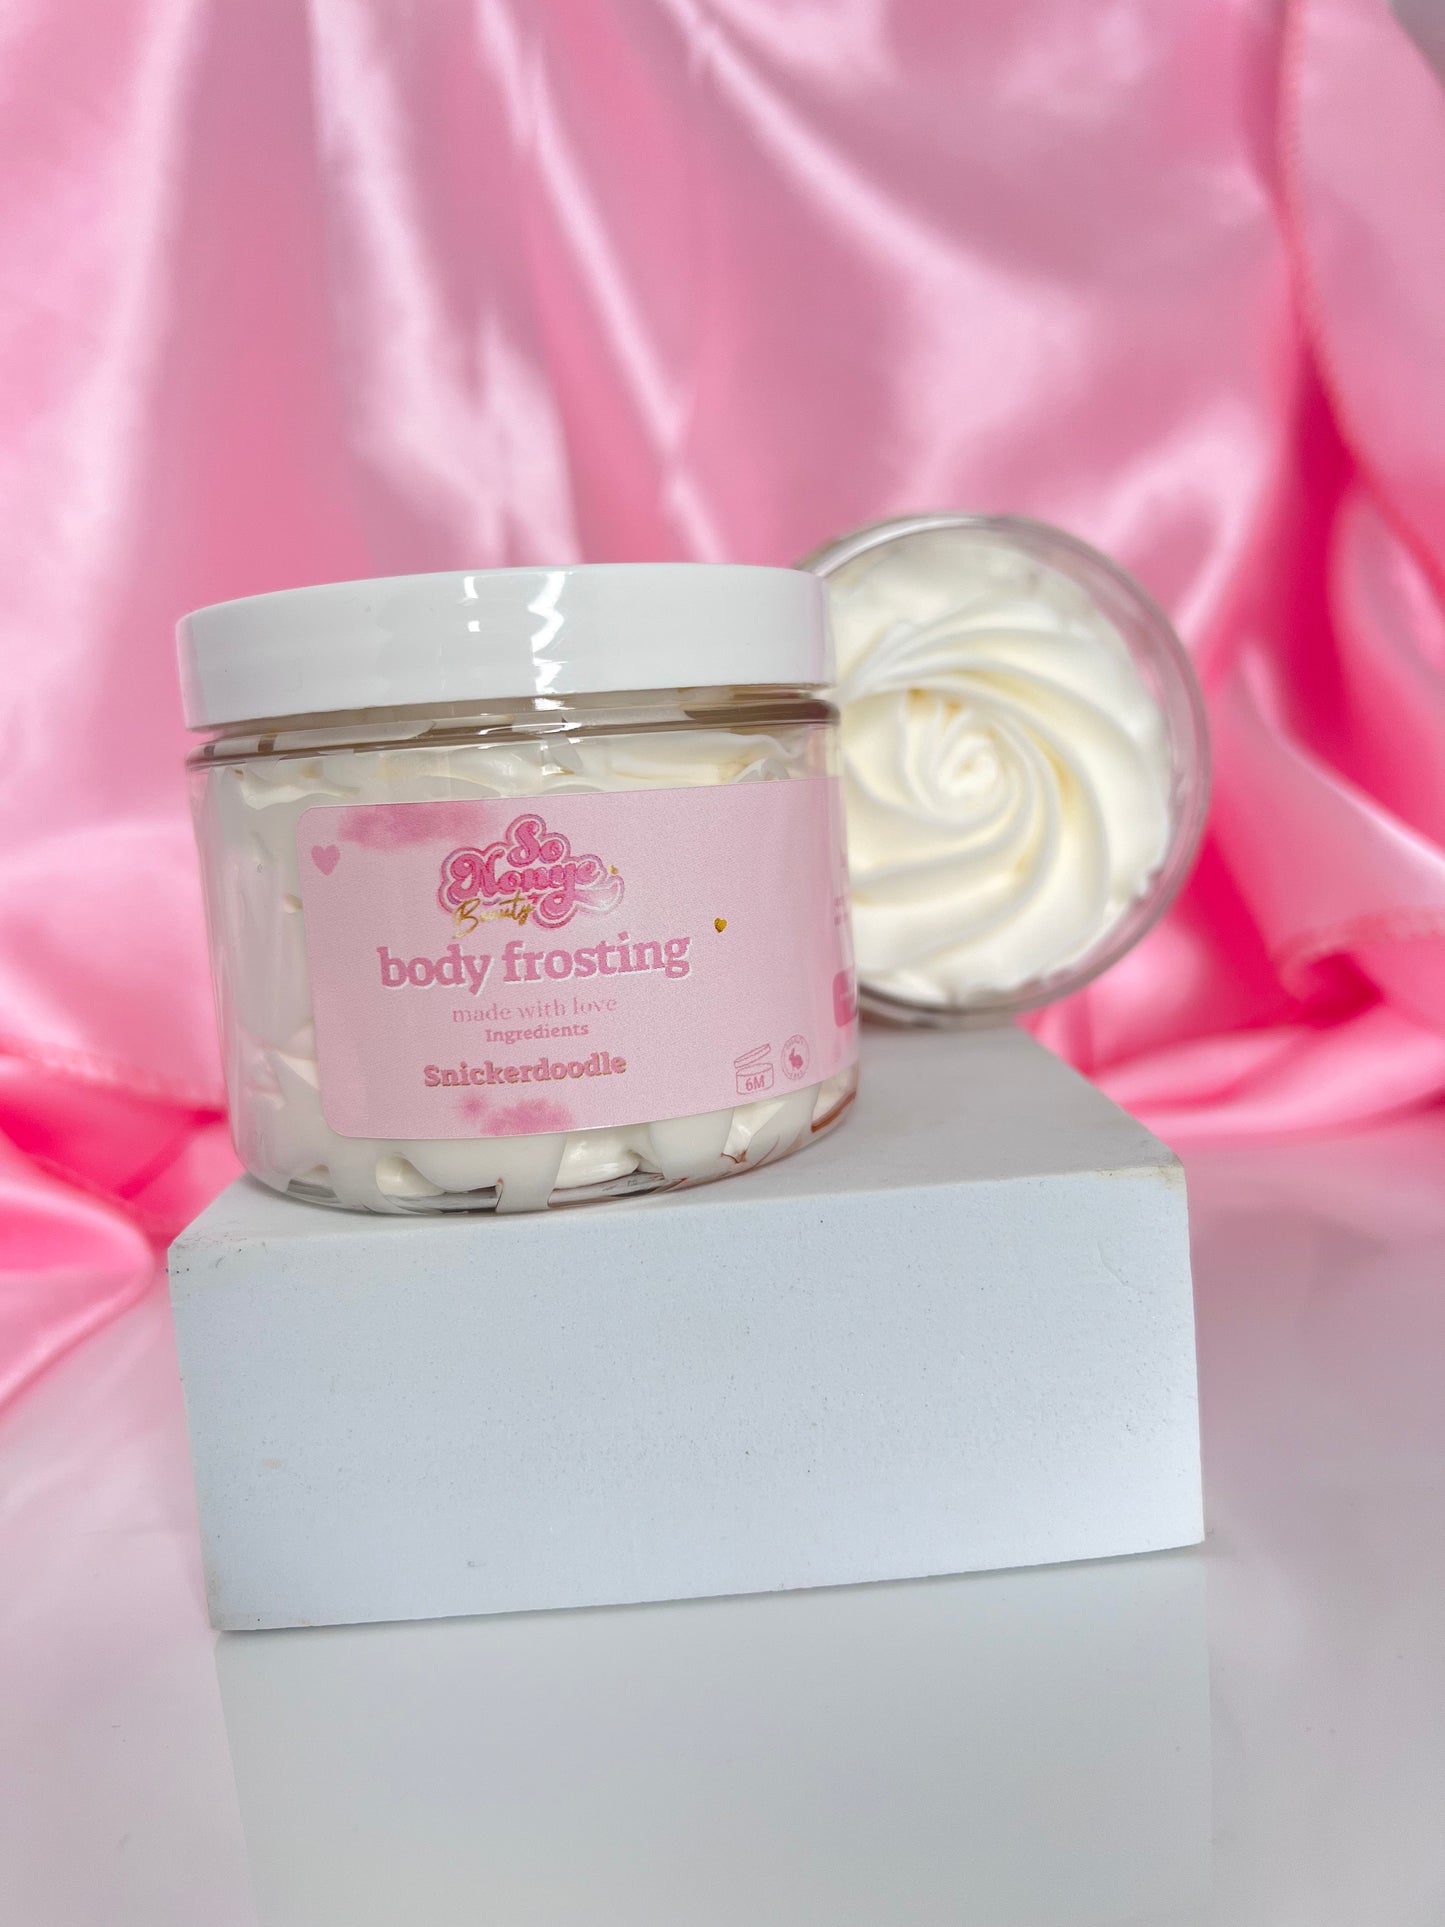 Snickerdoodle Body Frosting